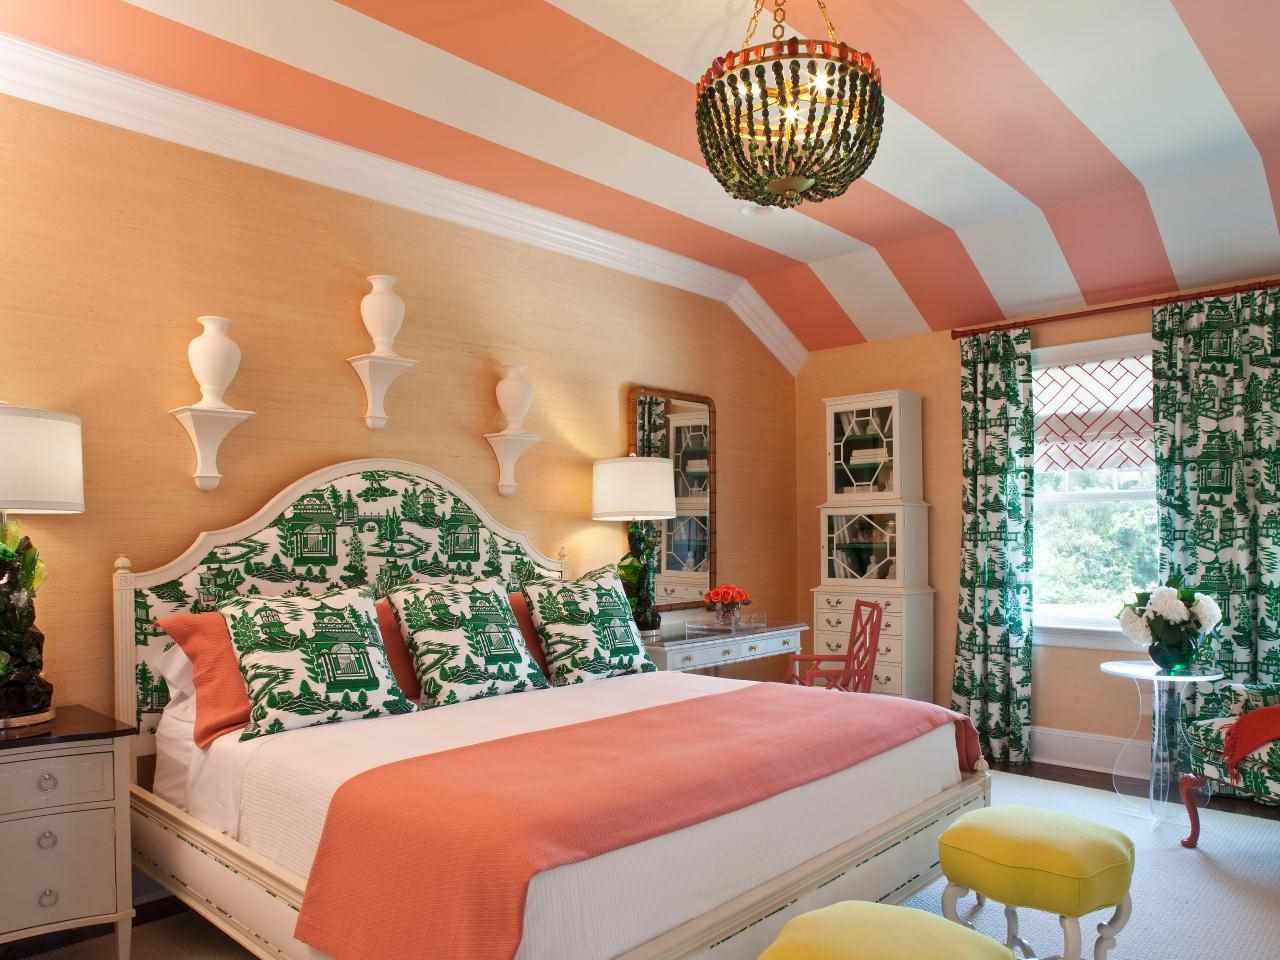 An example of a combination of light peach color in the design of an apartment